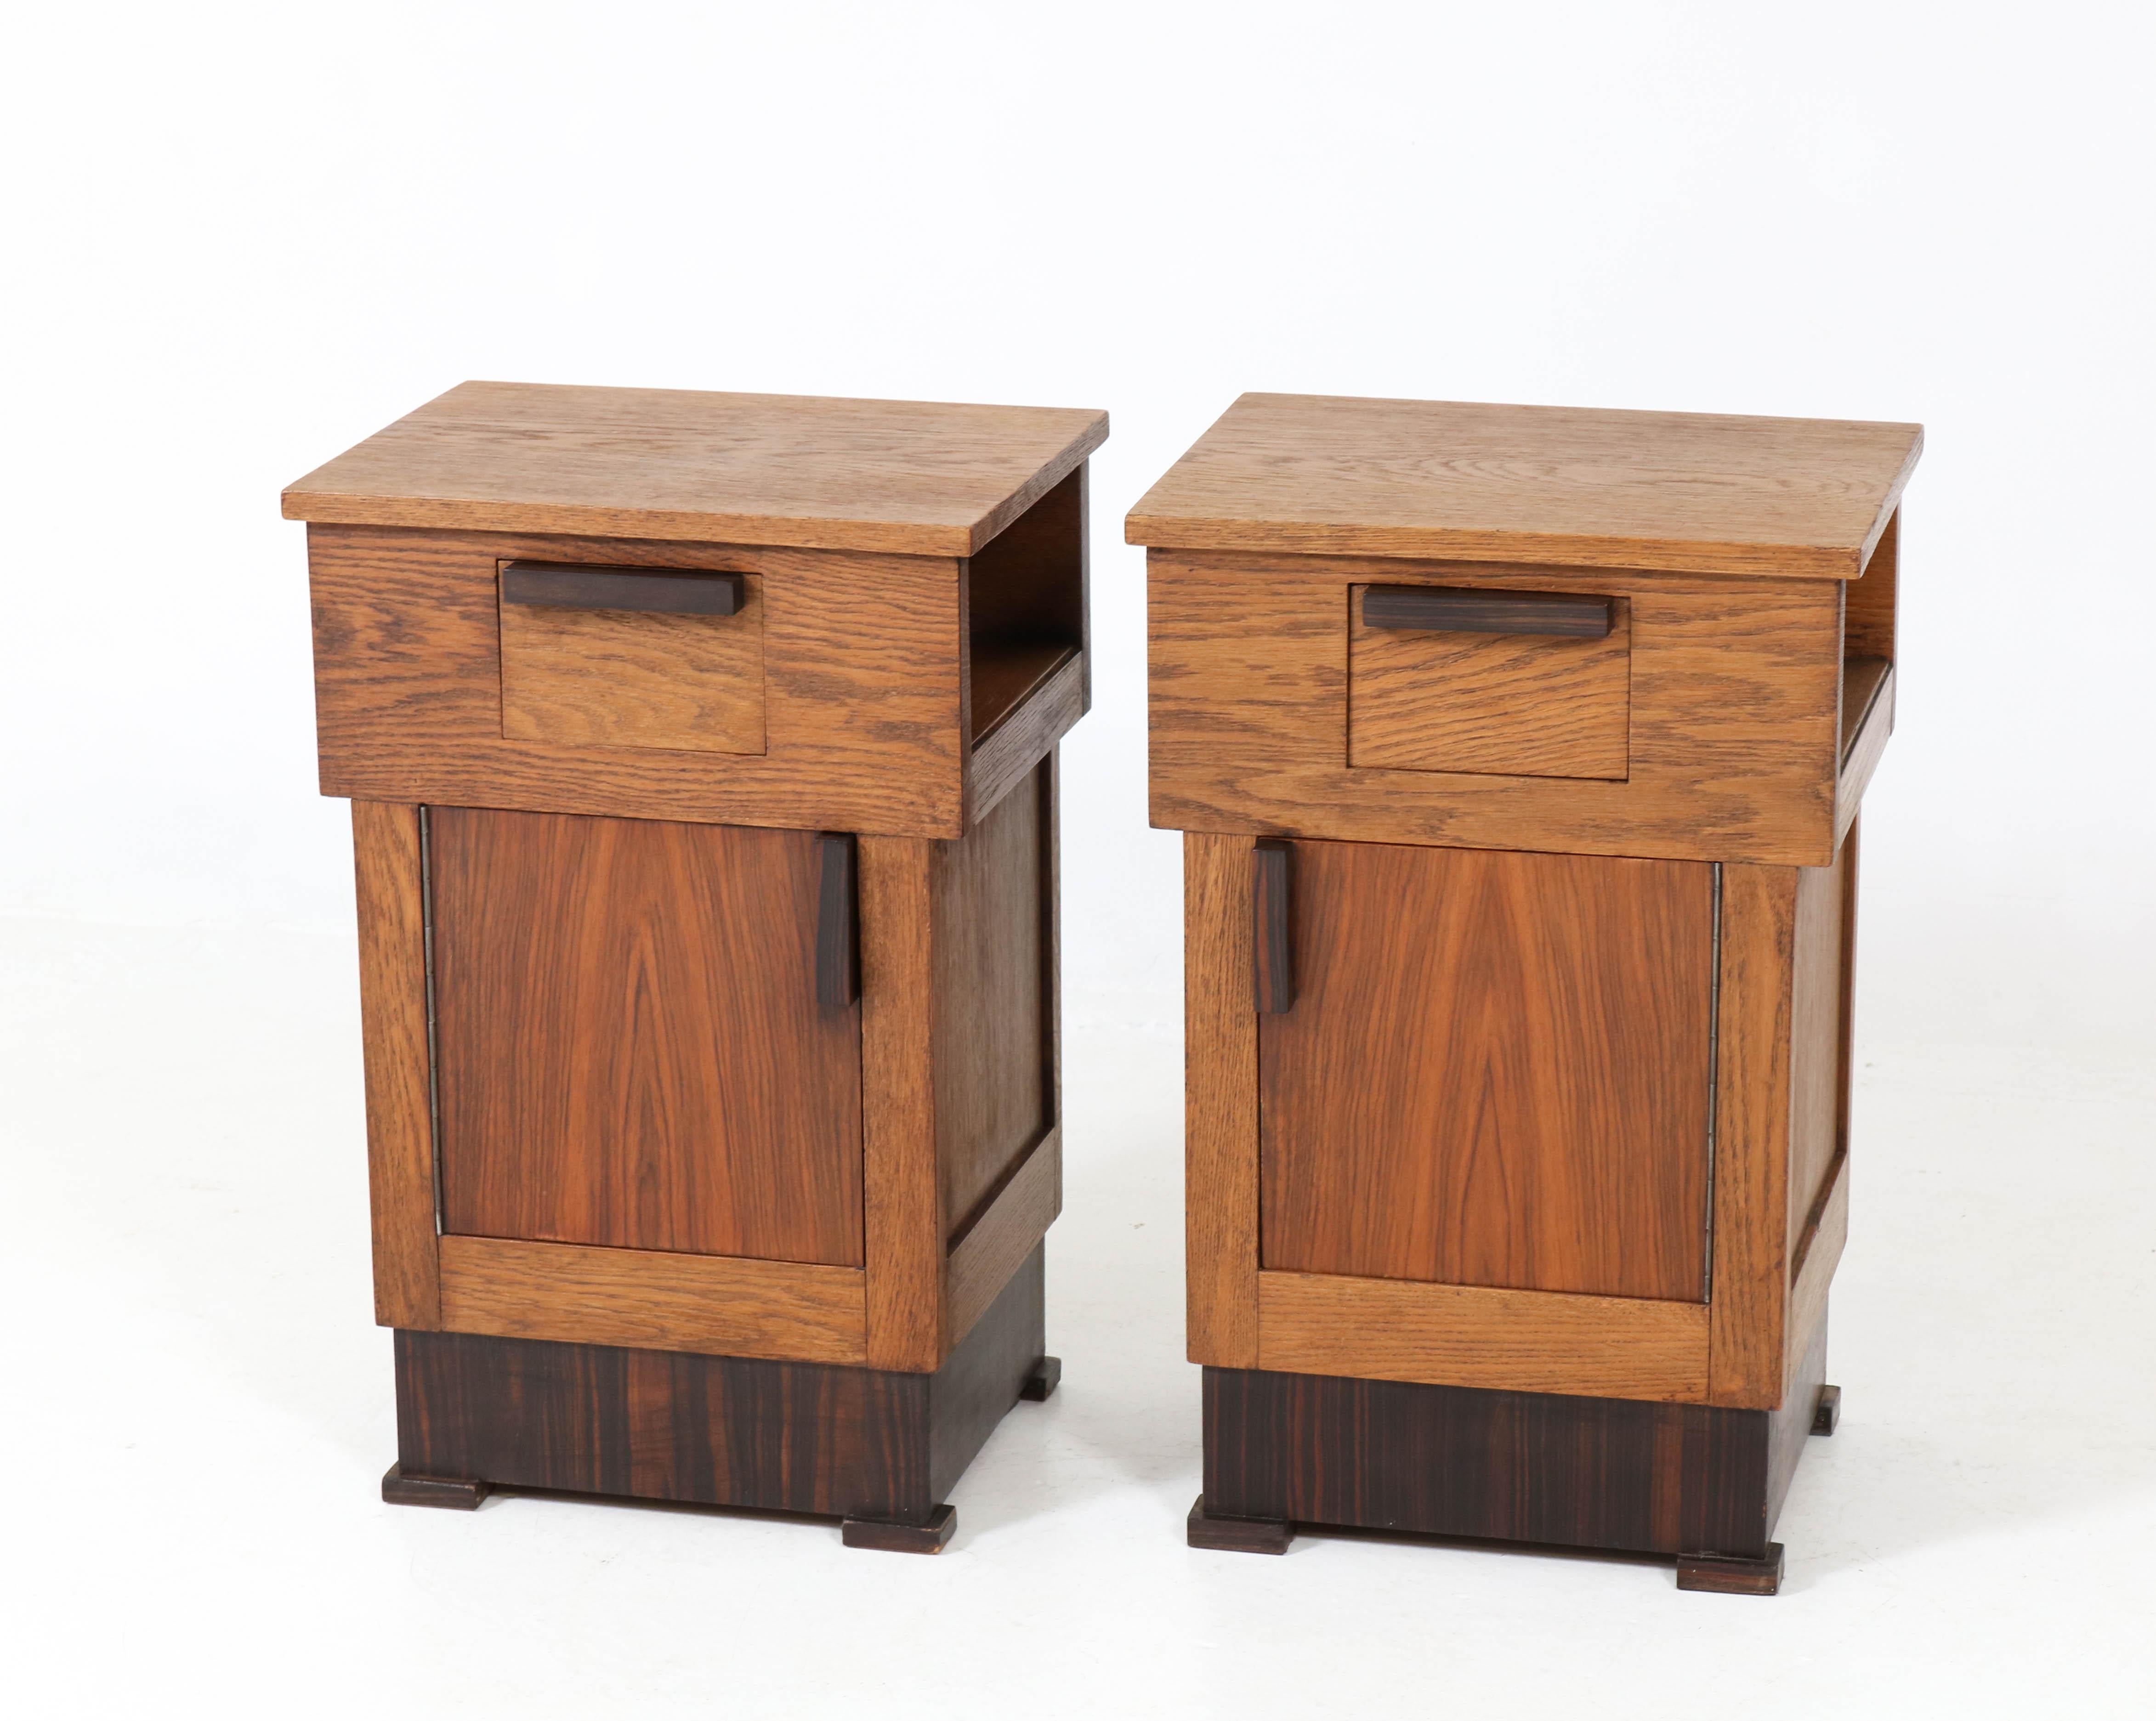 Offered by Amsterdam Modernism:
Wonderful pair of Art Deco Haagse school bedside tables or nightstands.
Solid oak with original solid Macassar ebony handles and veneer lining.
Striking Dutch design from the twenties.
In good original condition with